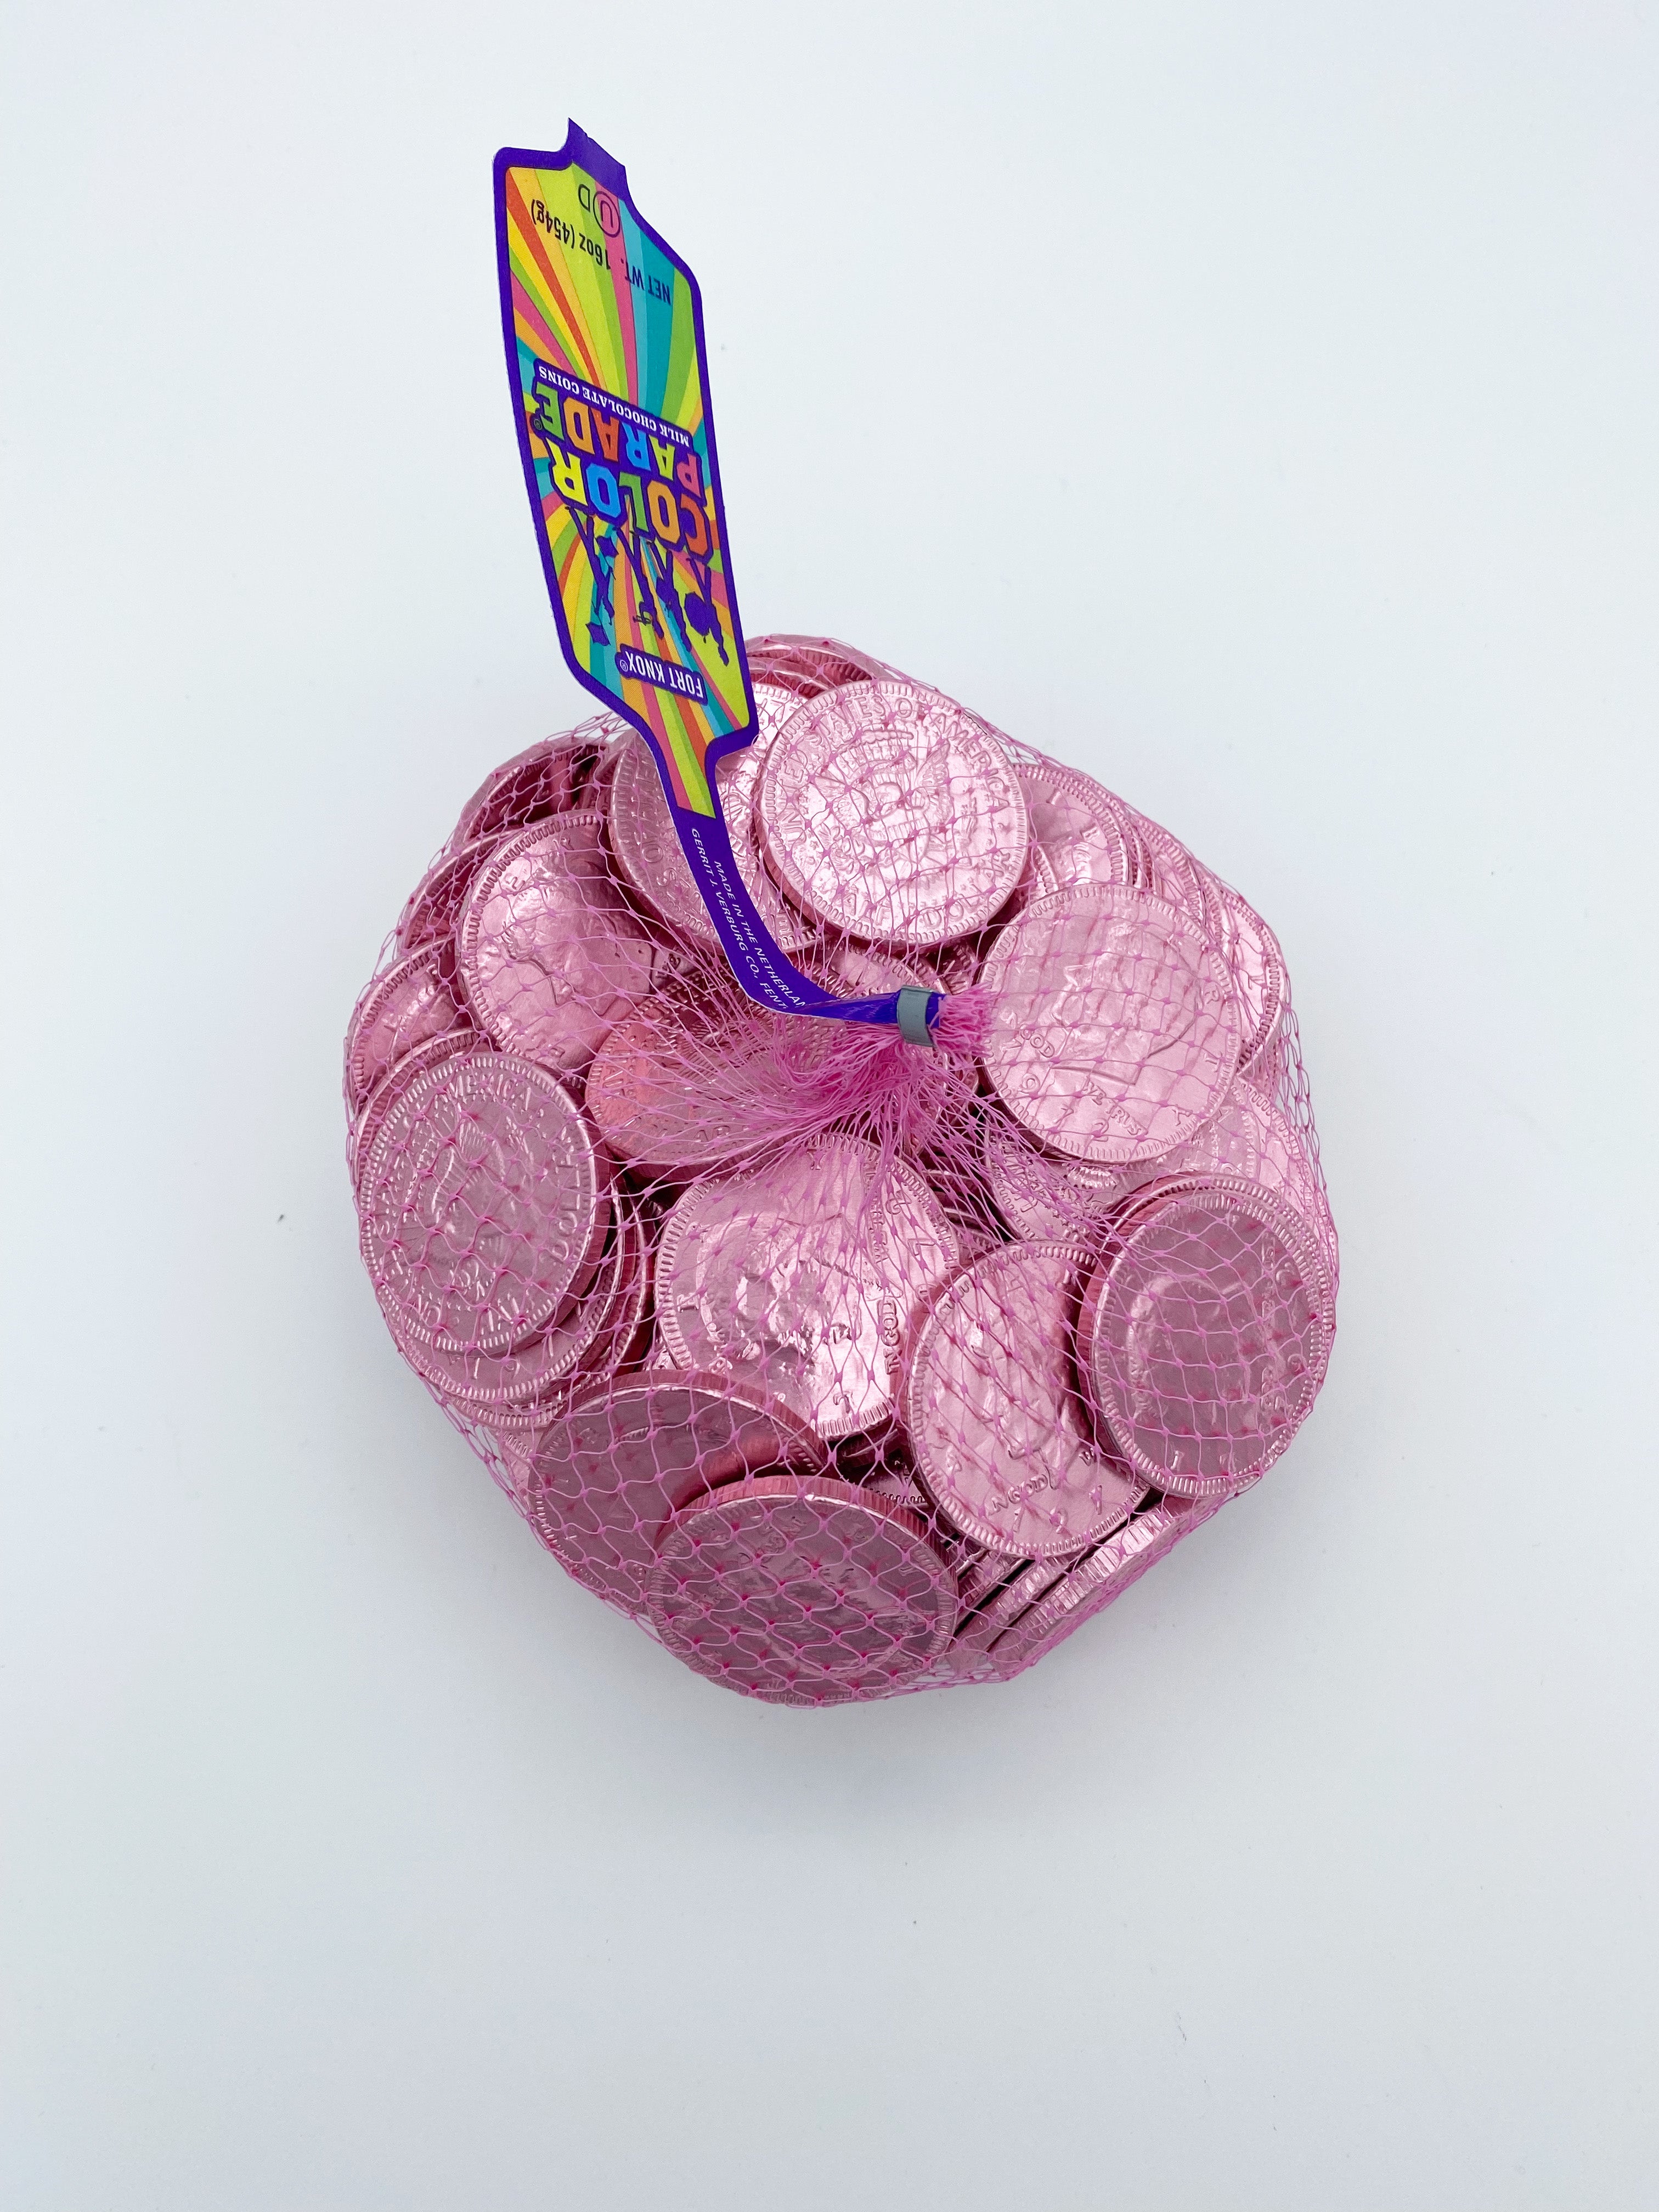 PINK CHOCOLATE COINS